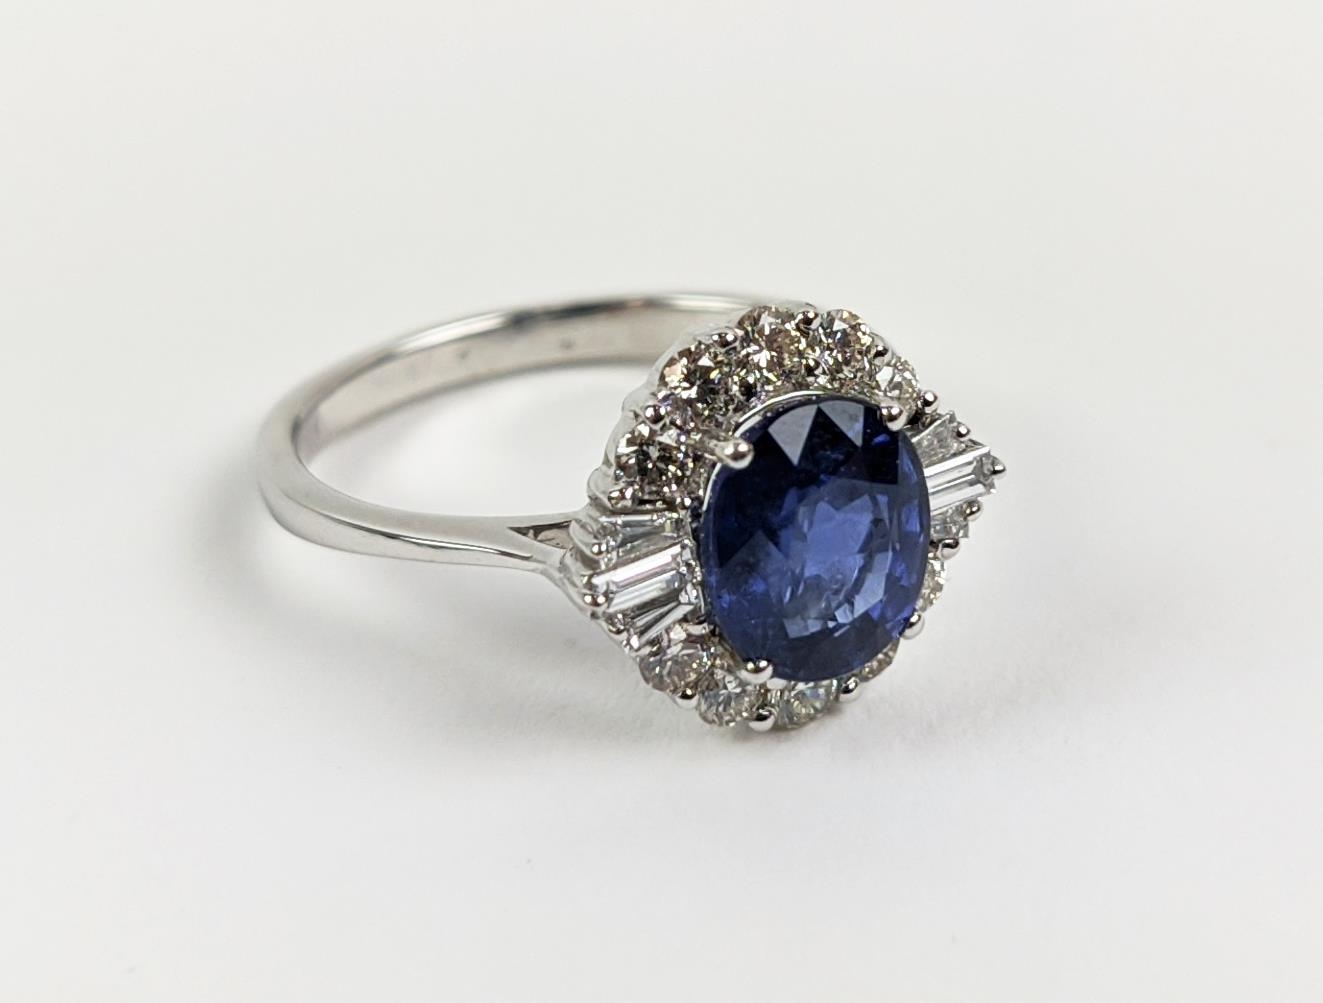 AN 18CT WHITE GOLD SAPPHIRE AND DIAMOND HALO RING, the central oval mixed cut sapphire of - Image 6 of 9